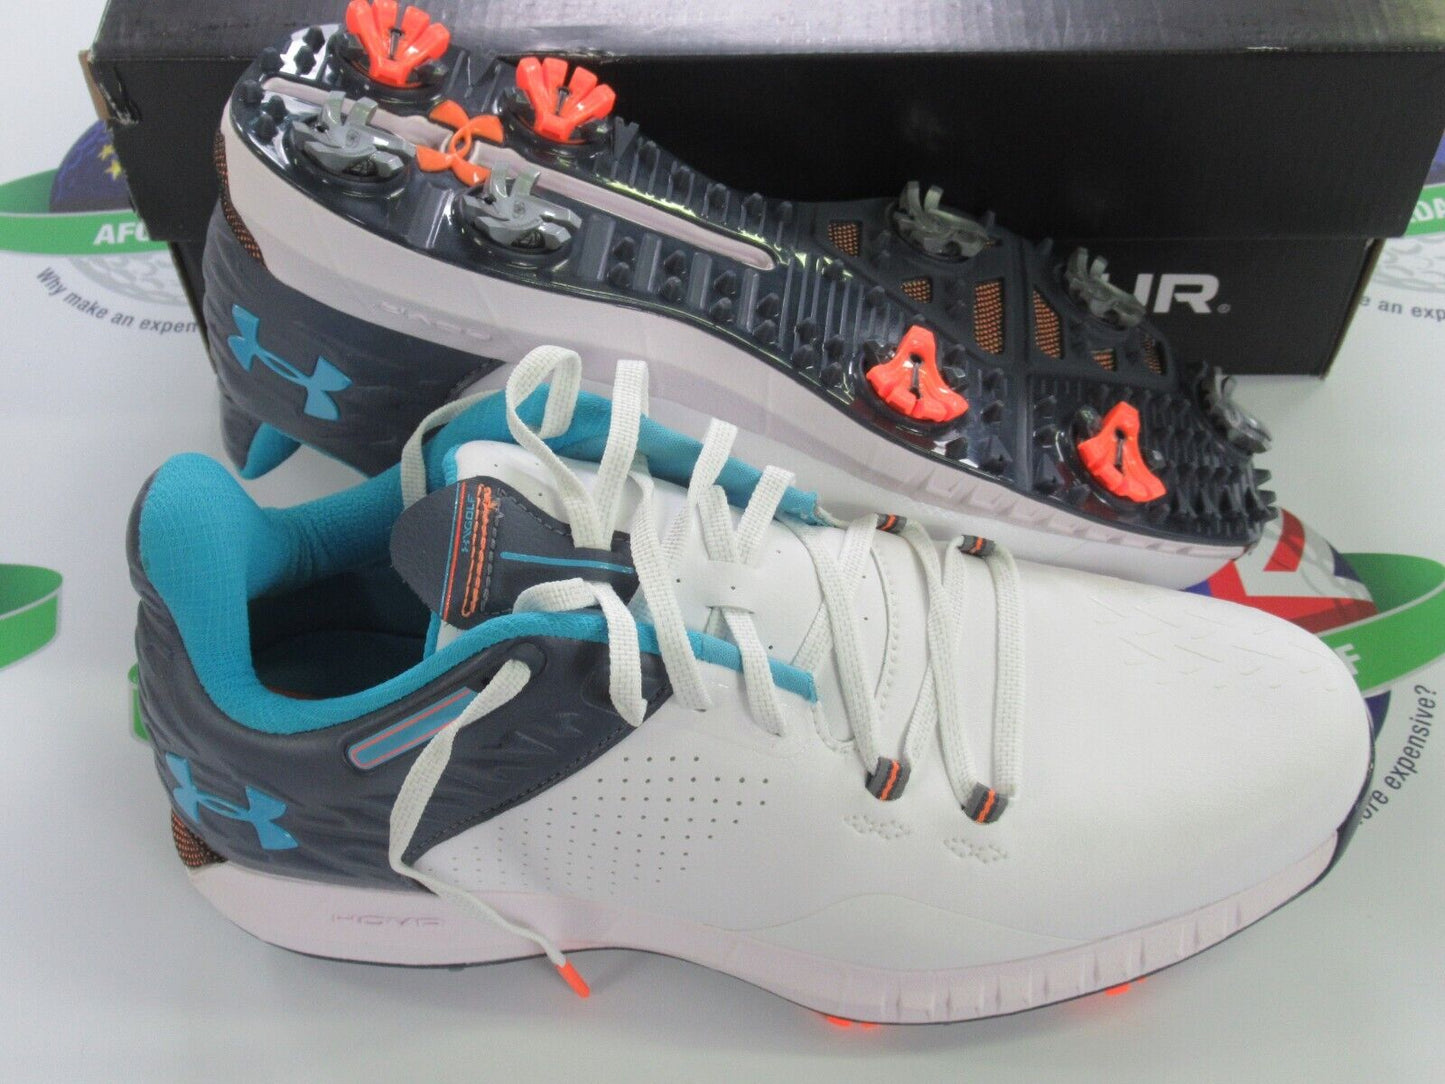 under armour hovr drive 2 wide waterproof golf shoes white/grey/blue uk size 8.5